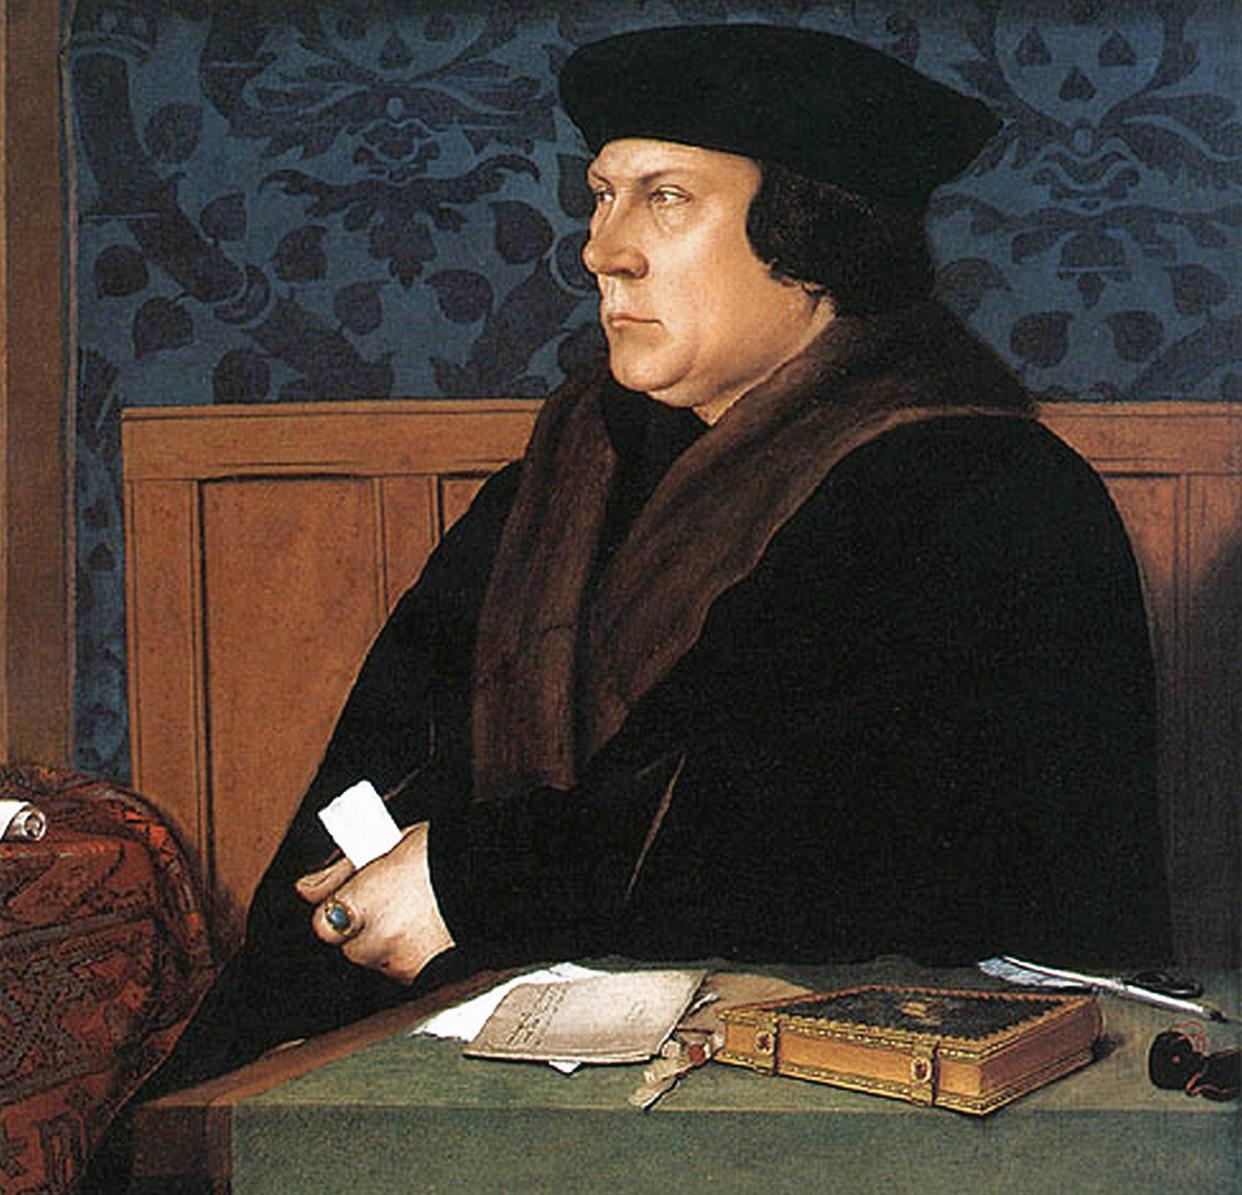 UNSPECIFIED - CIRCA 1754: Thomas Cromwell Earl of Essex, painted by Holbein. Thomas Cromwell, 1st Earl of Essex, KG, PC (c. 1485(1) - 28 July 1540), known as 1st Baron Cromwell of Wimbledon between 1536 and 1540, was an English statesman who served as King Henry VIII's chief minister from 1532 to 1540. (Photo by Universal History Archive/Getty Images)